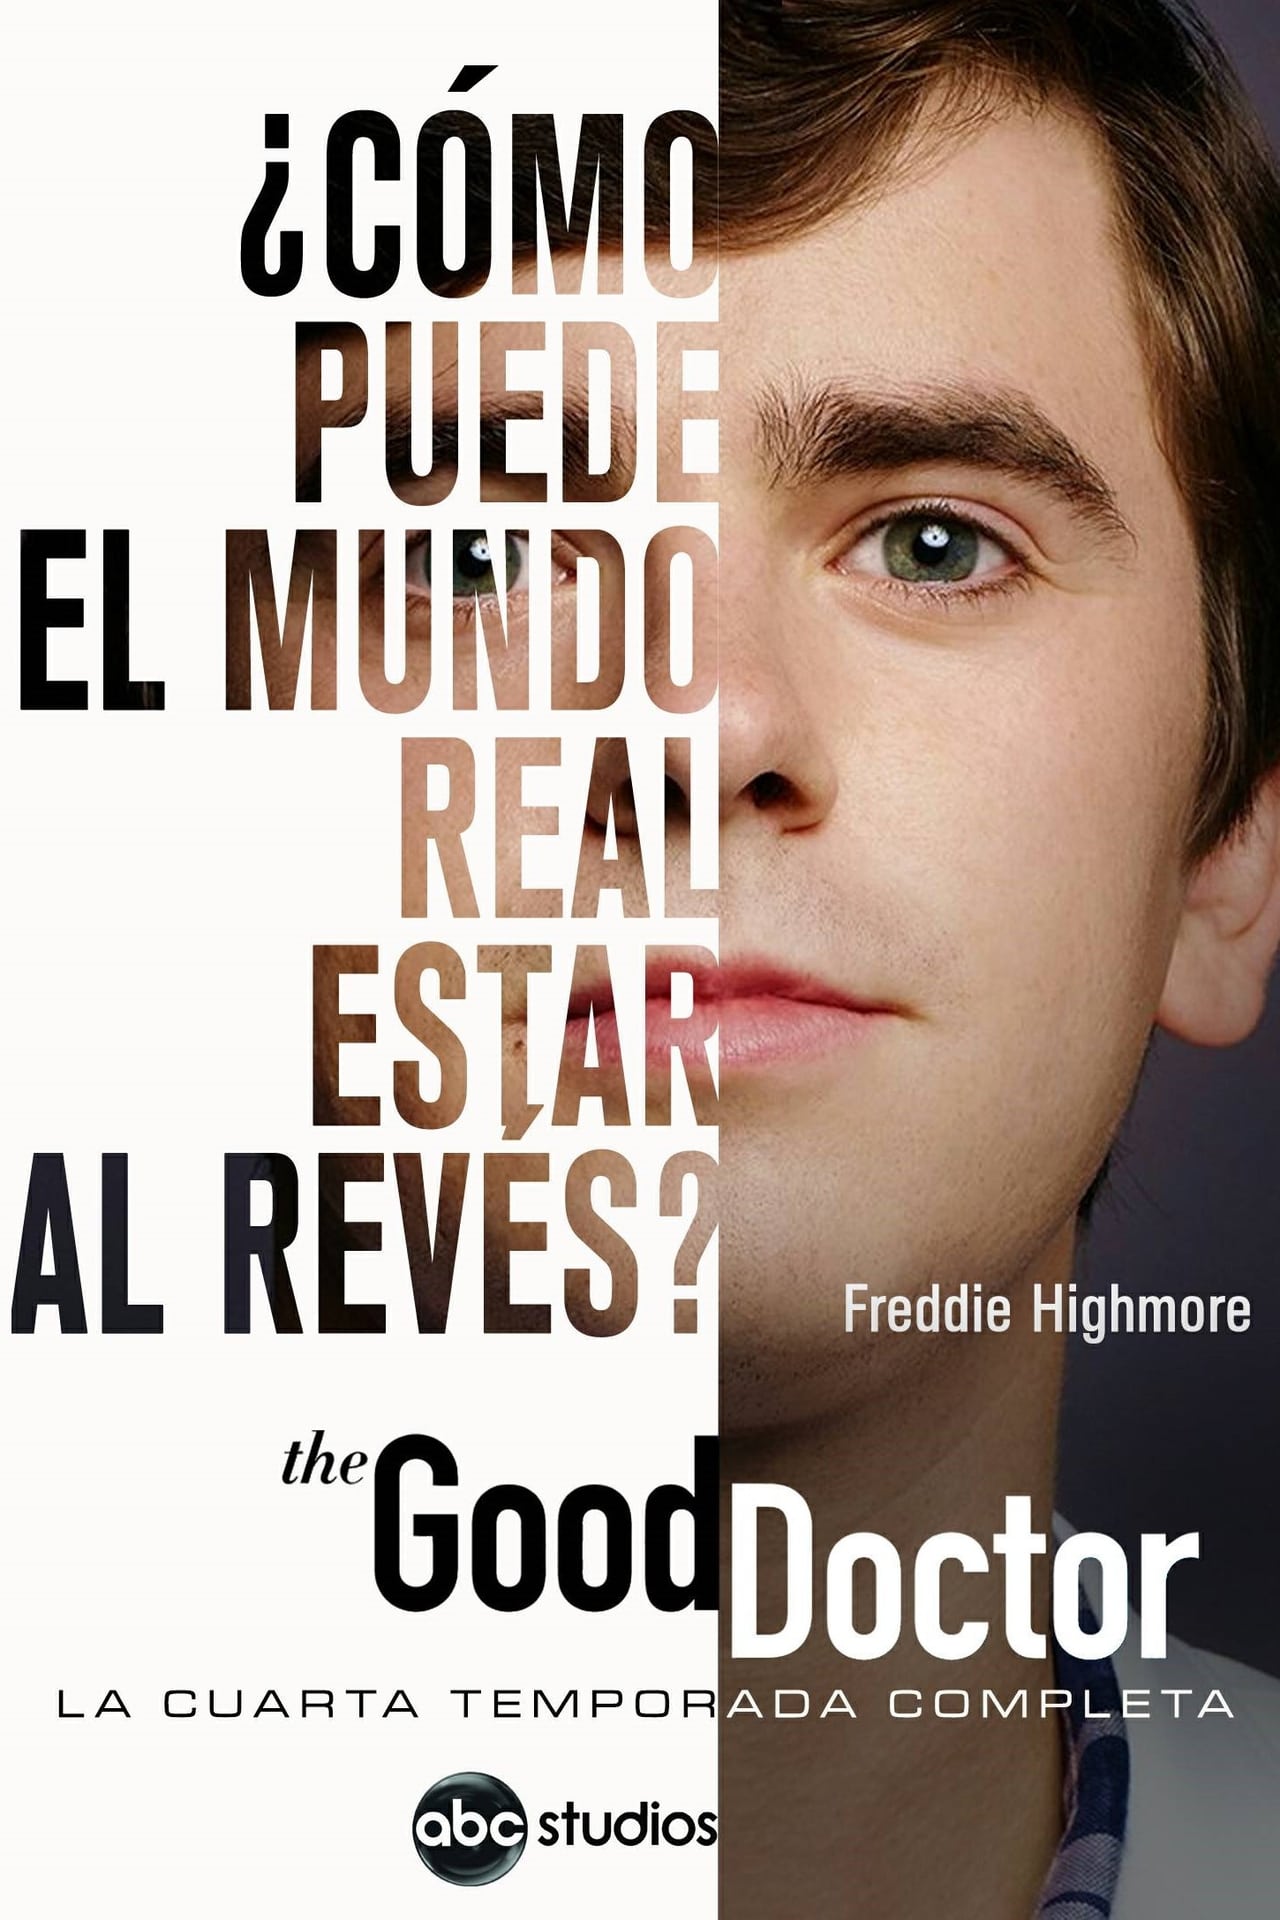 Image The Good Doctor